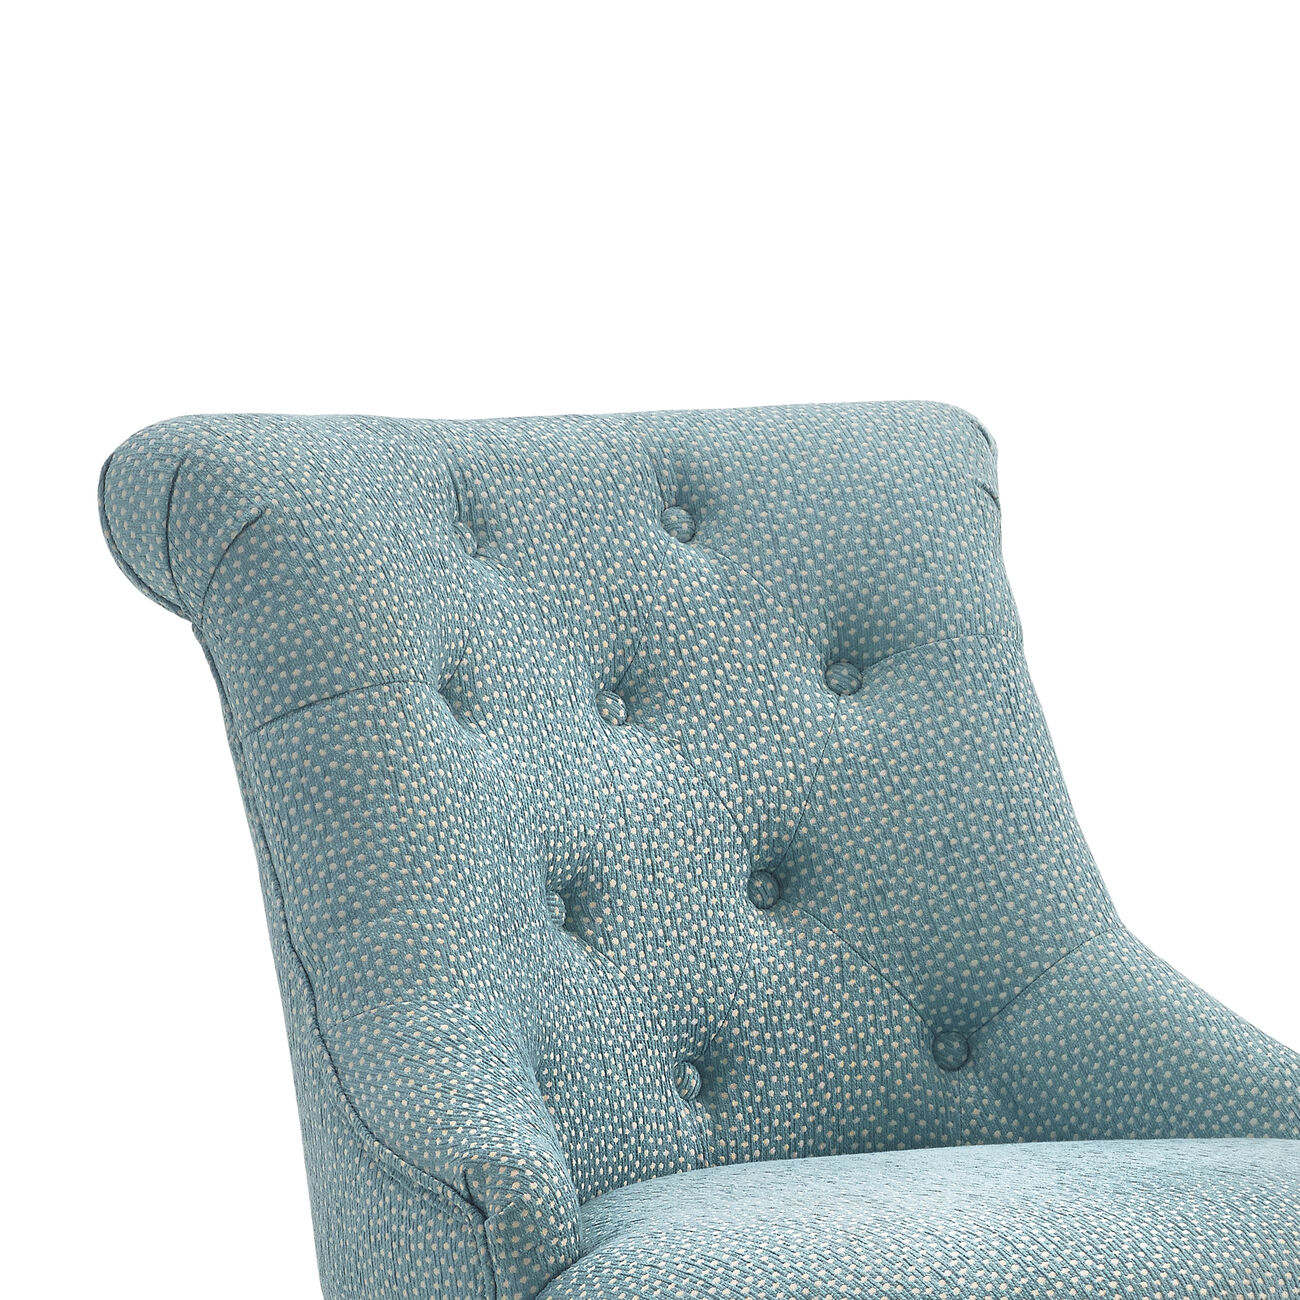 Wooden Office Chair with Textured Fabric Upholstery, Blue and Gray